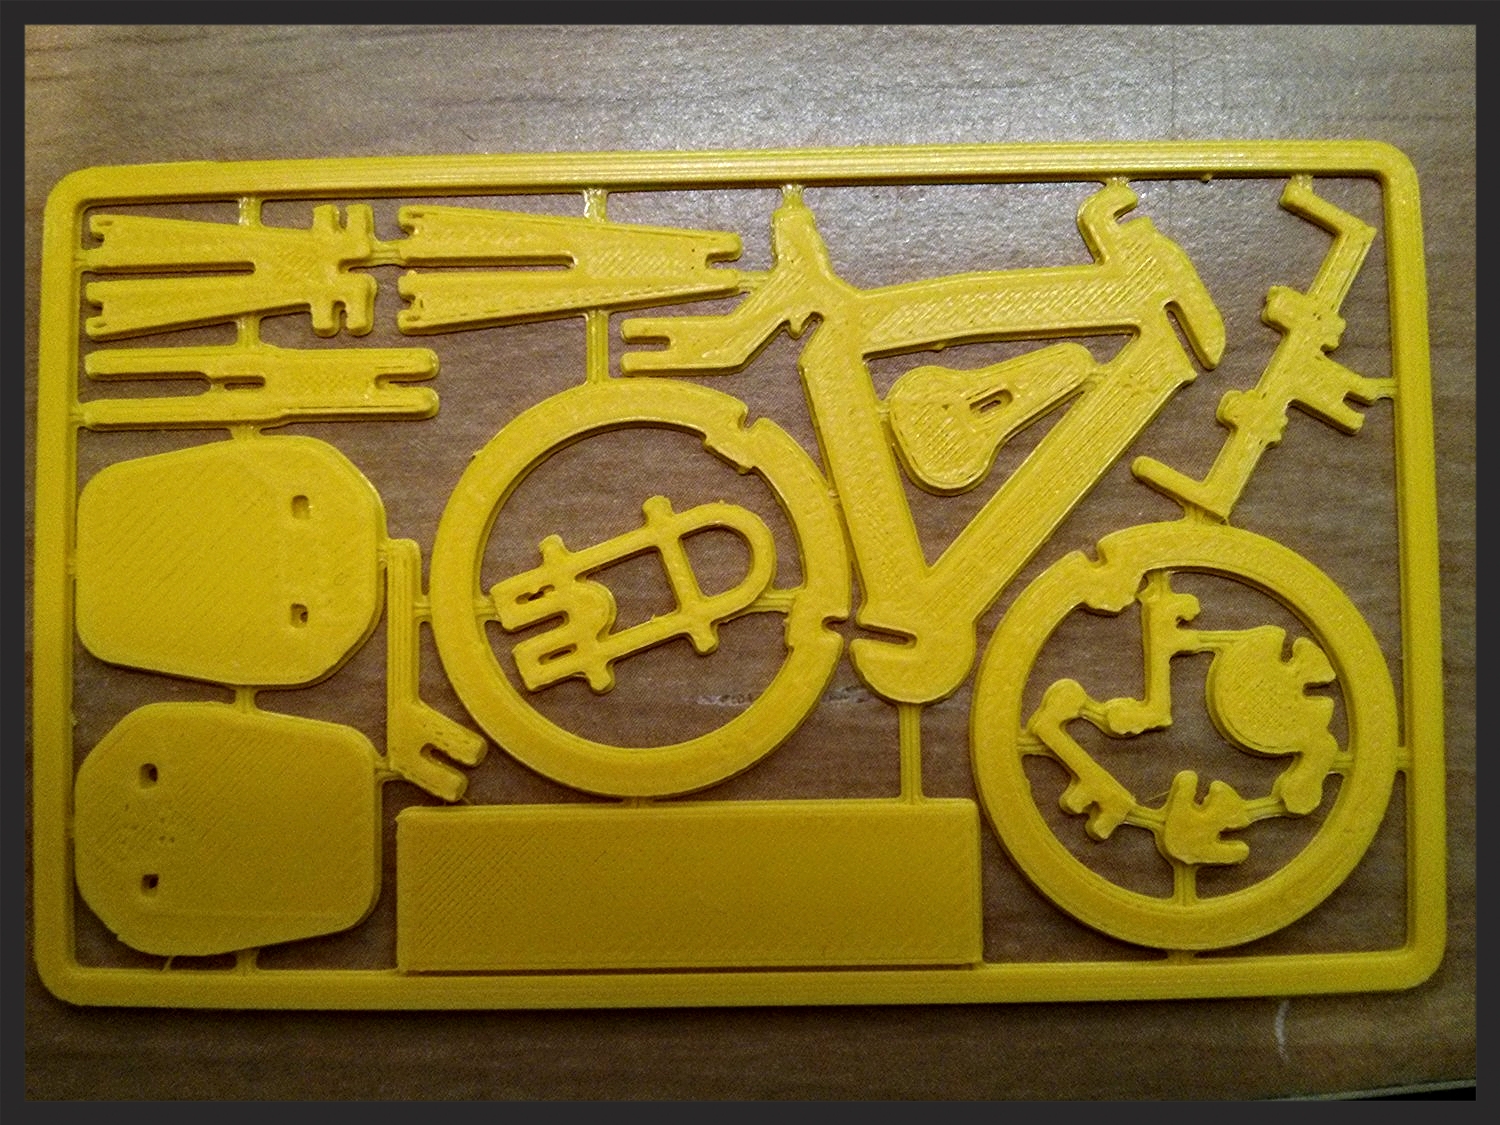 Bicycle Business Card